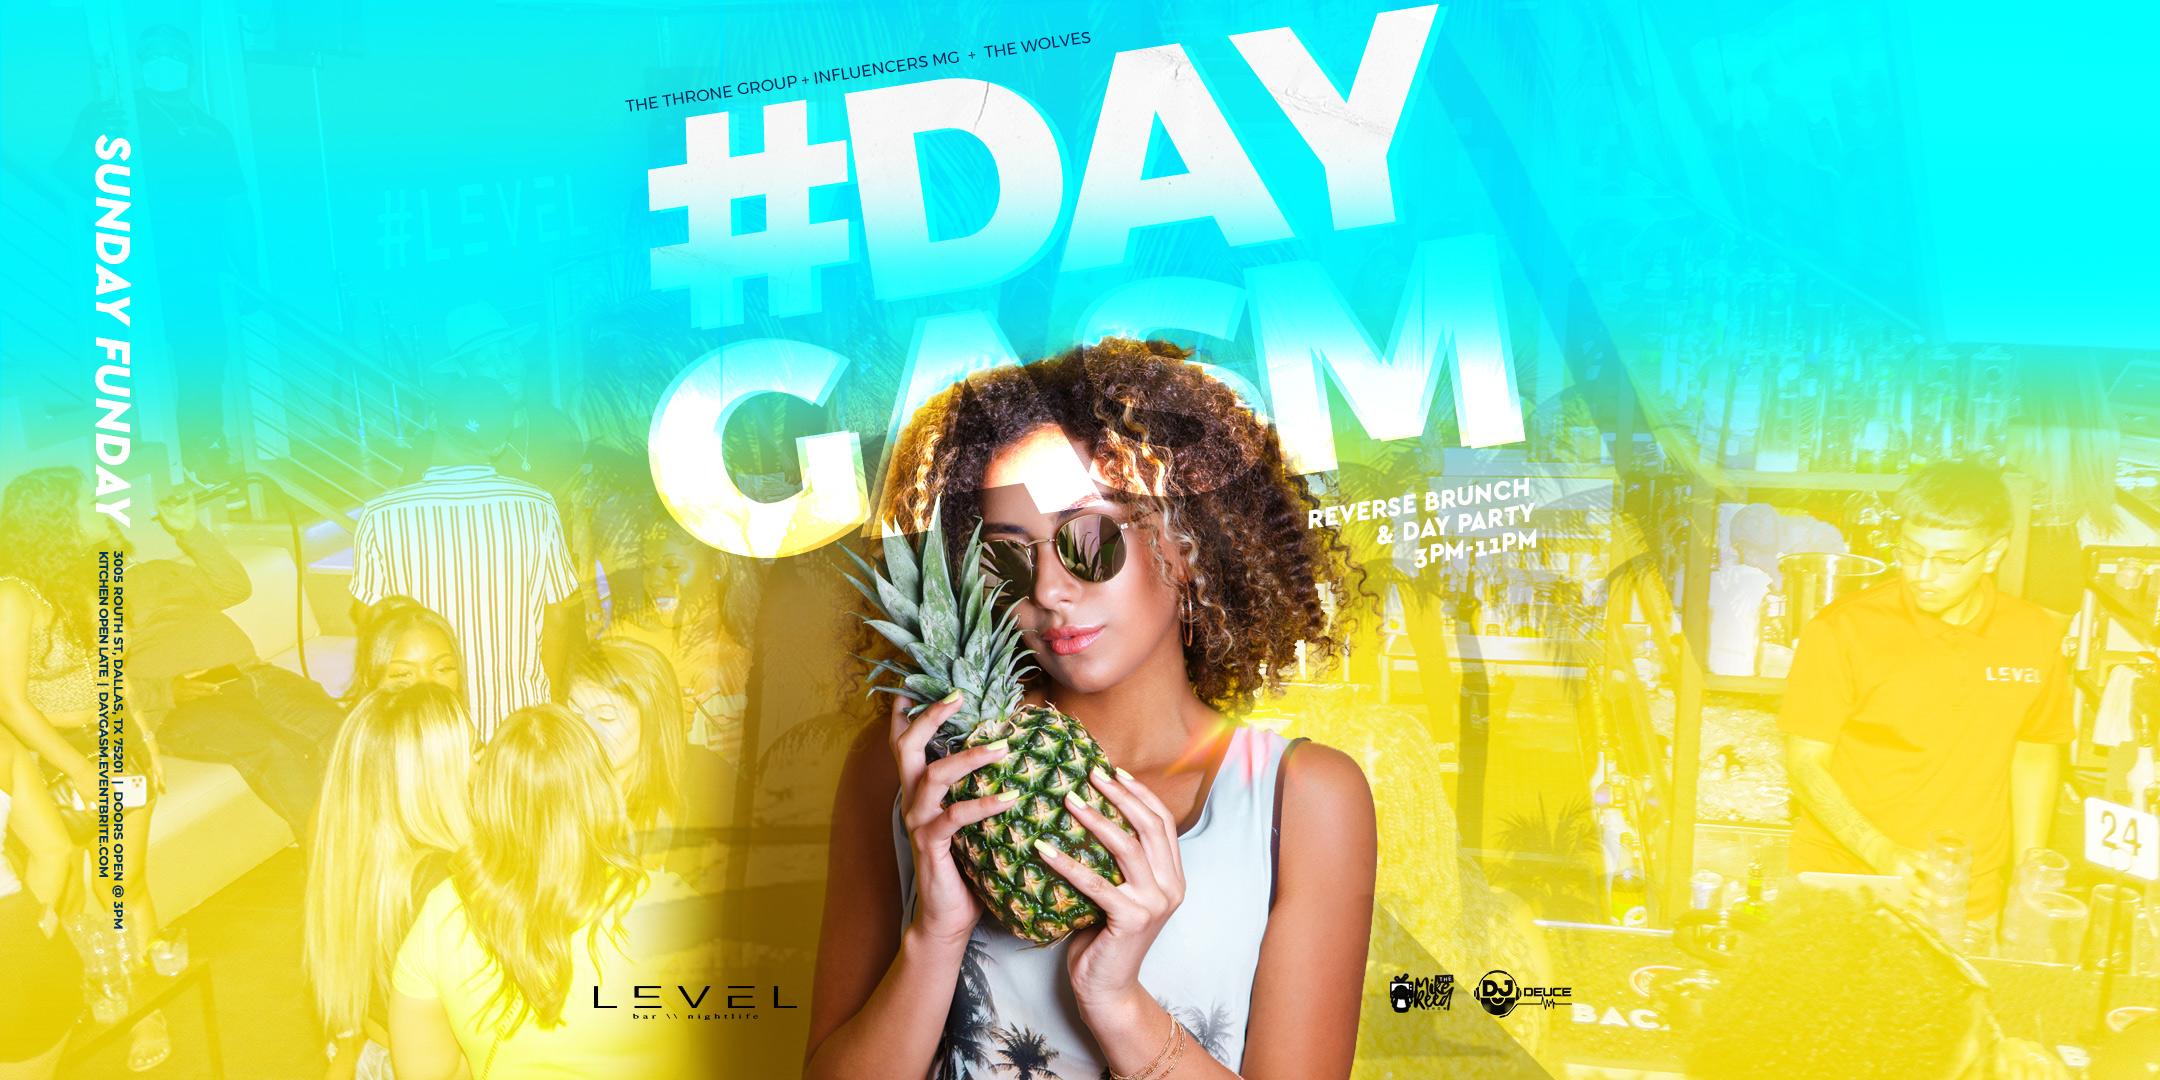 DAYGASM REVERSE BRUNCH + DAY PARTY